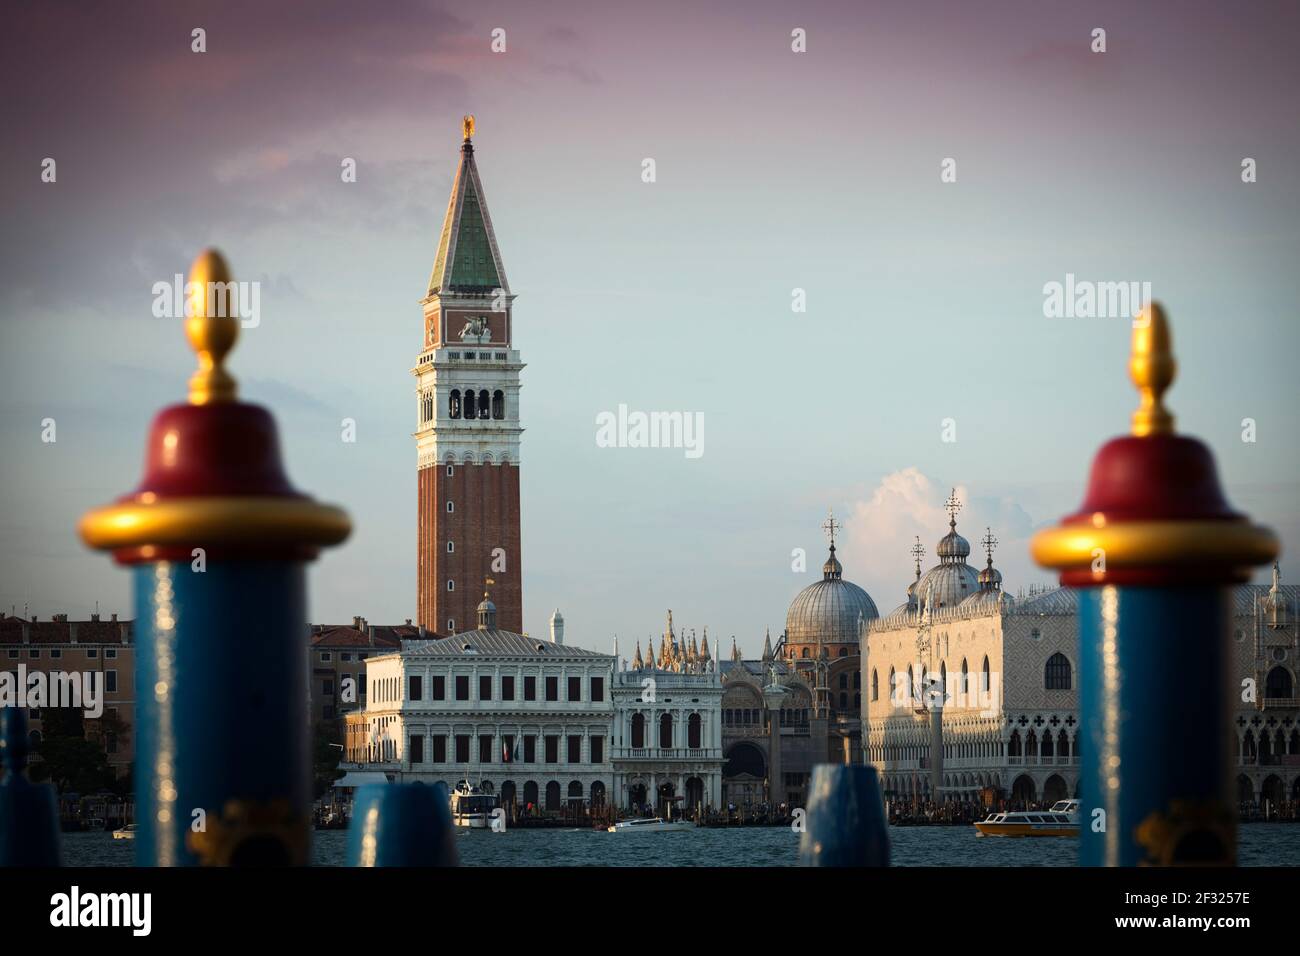 Italy, Venice, A view of Venice with the Doge's Palace and the Campanile from the water. Stock Photo